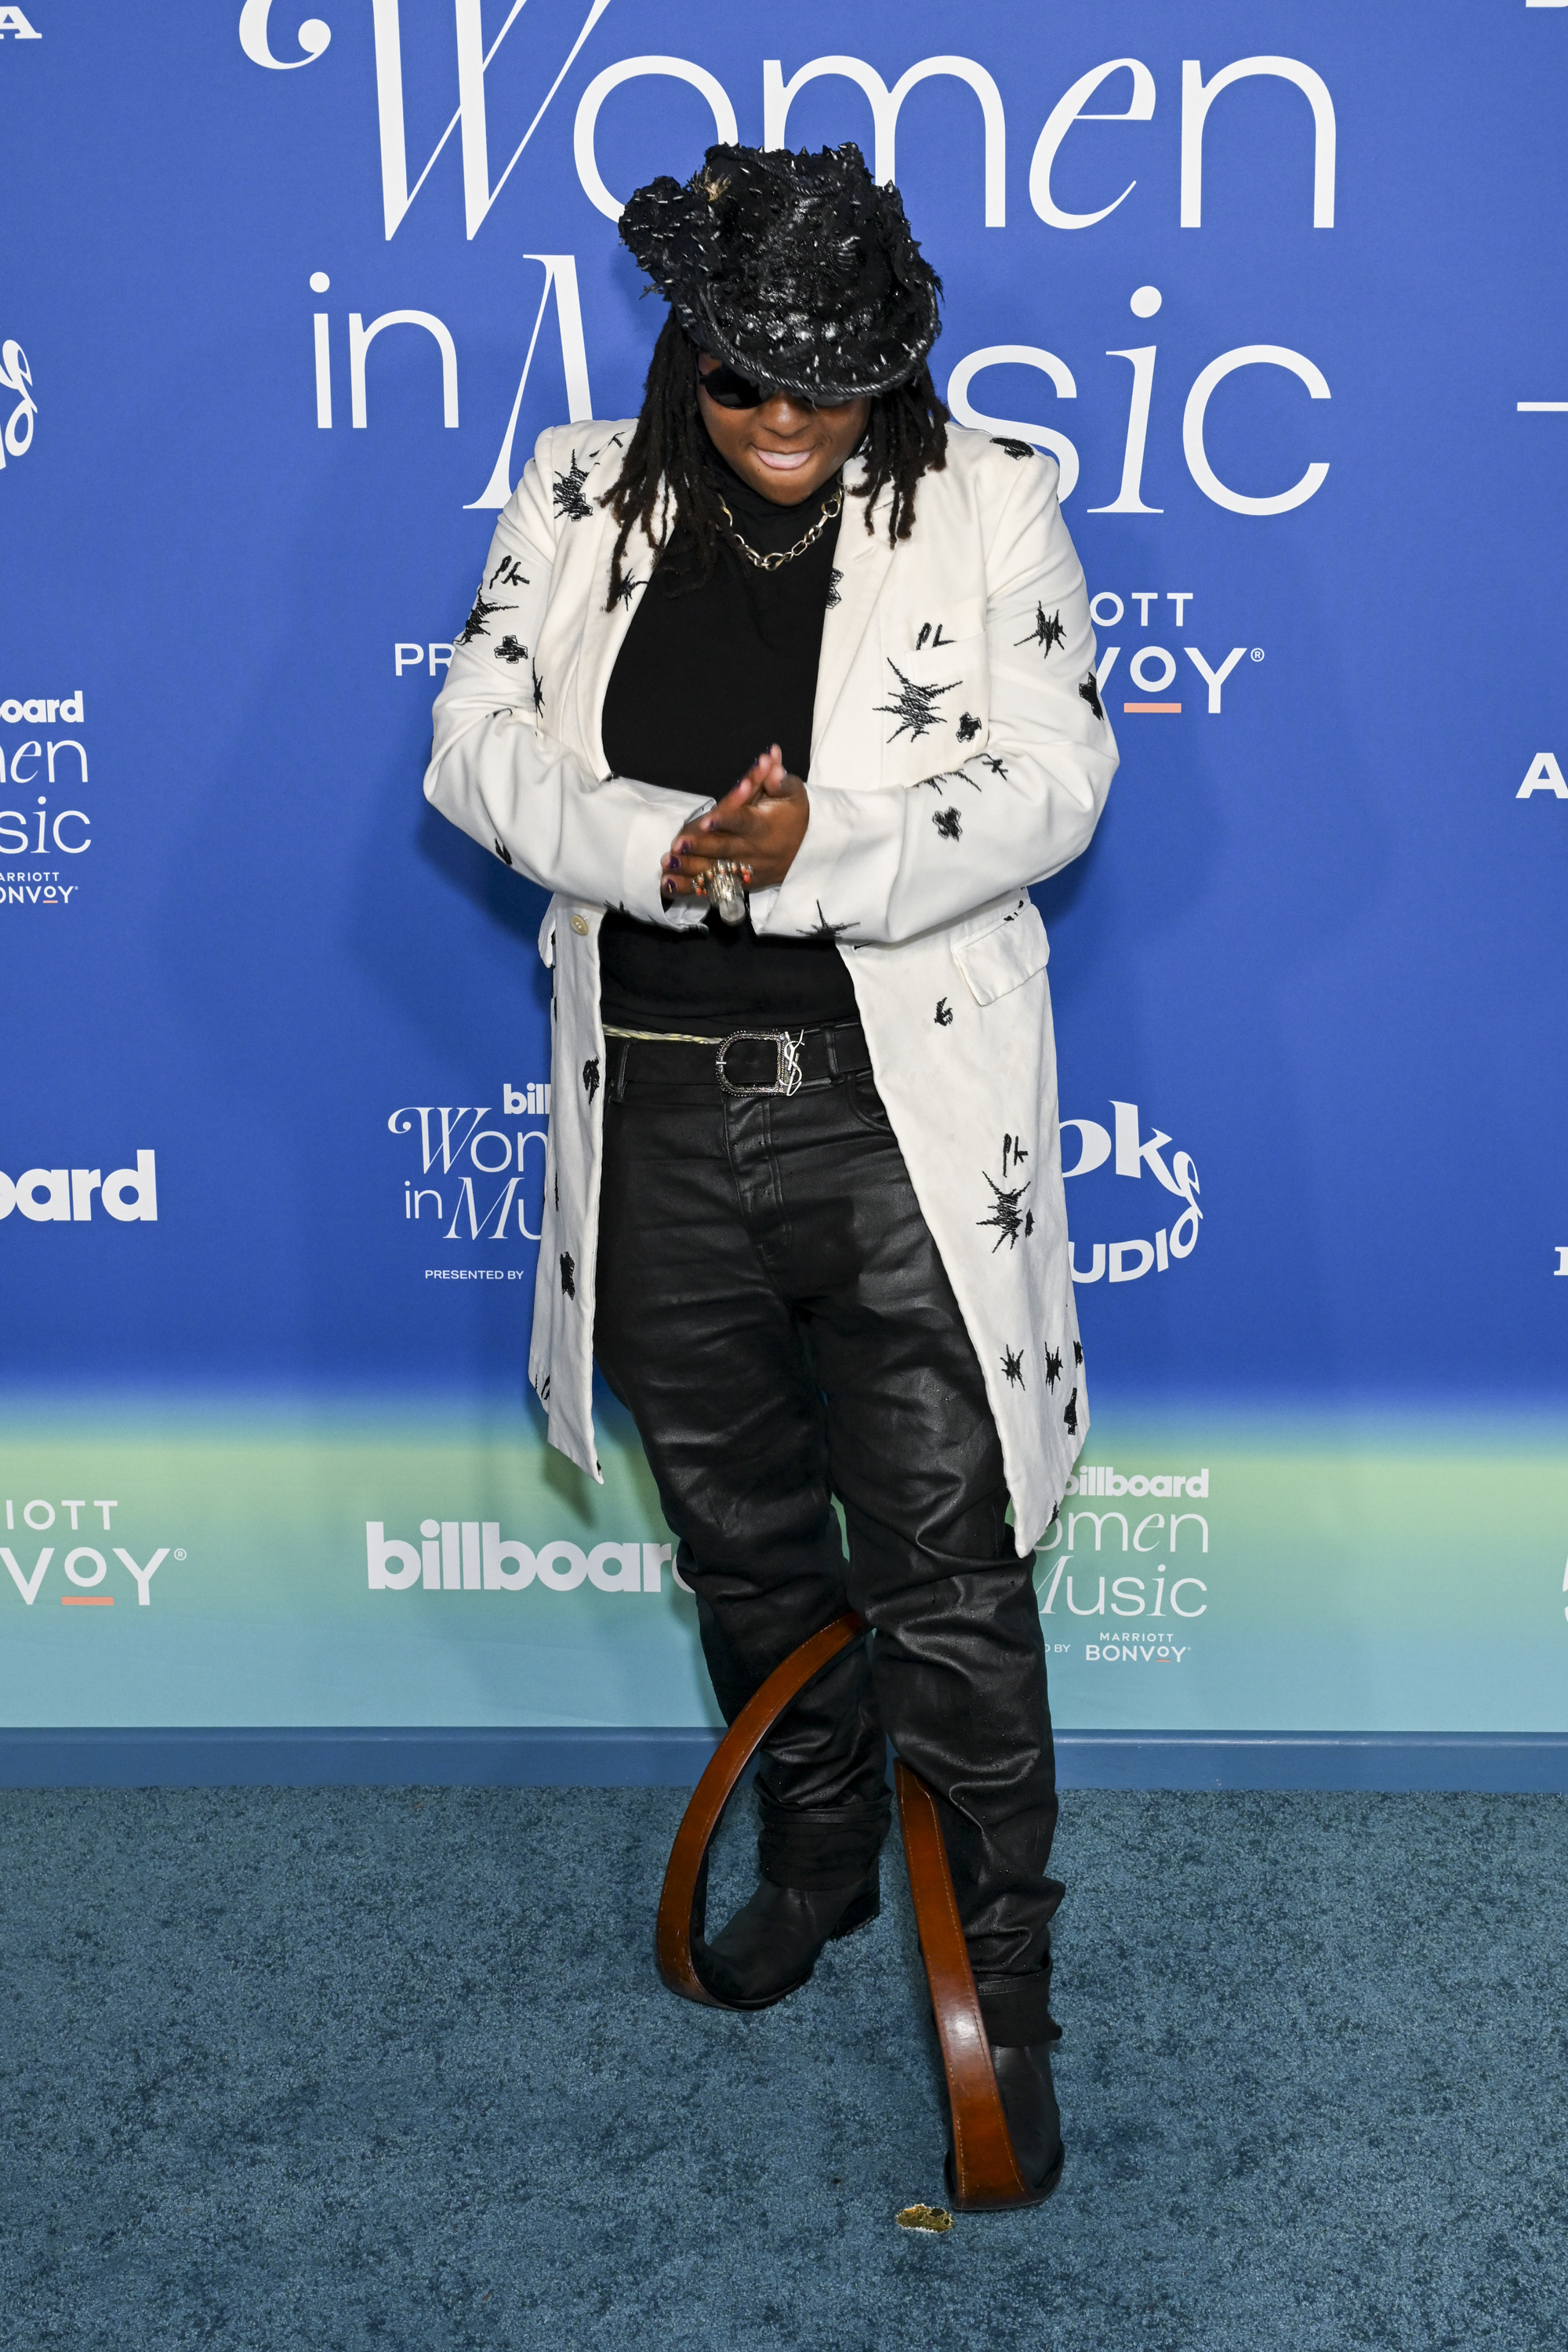 Ink in a long white jacket with star details, black hat, and boots that have a long curving toe